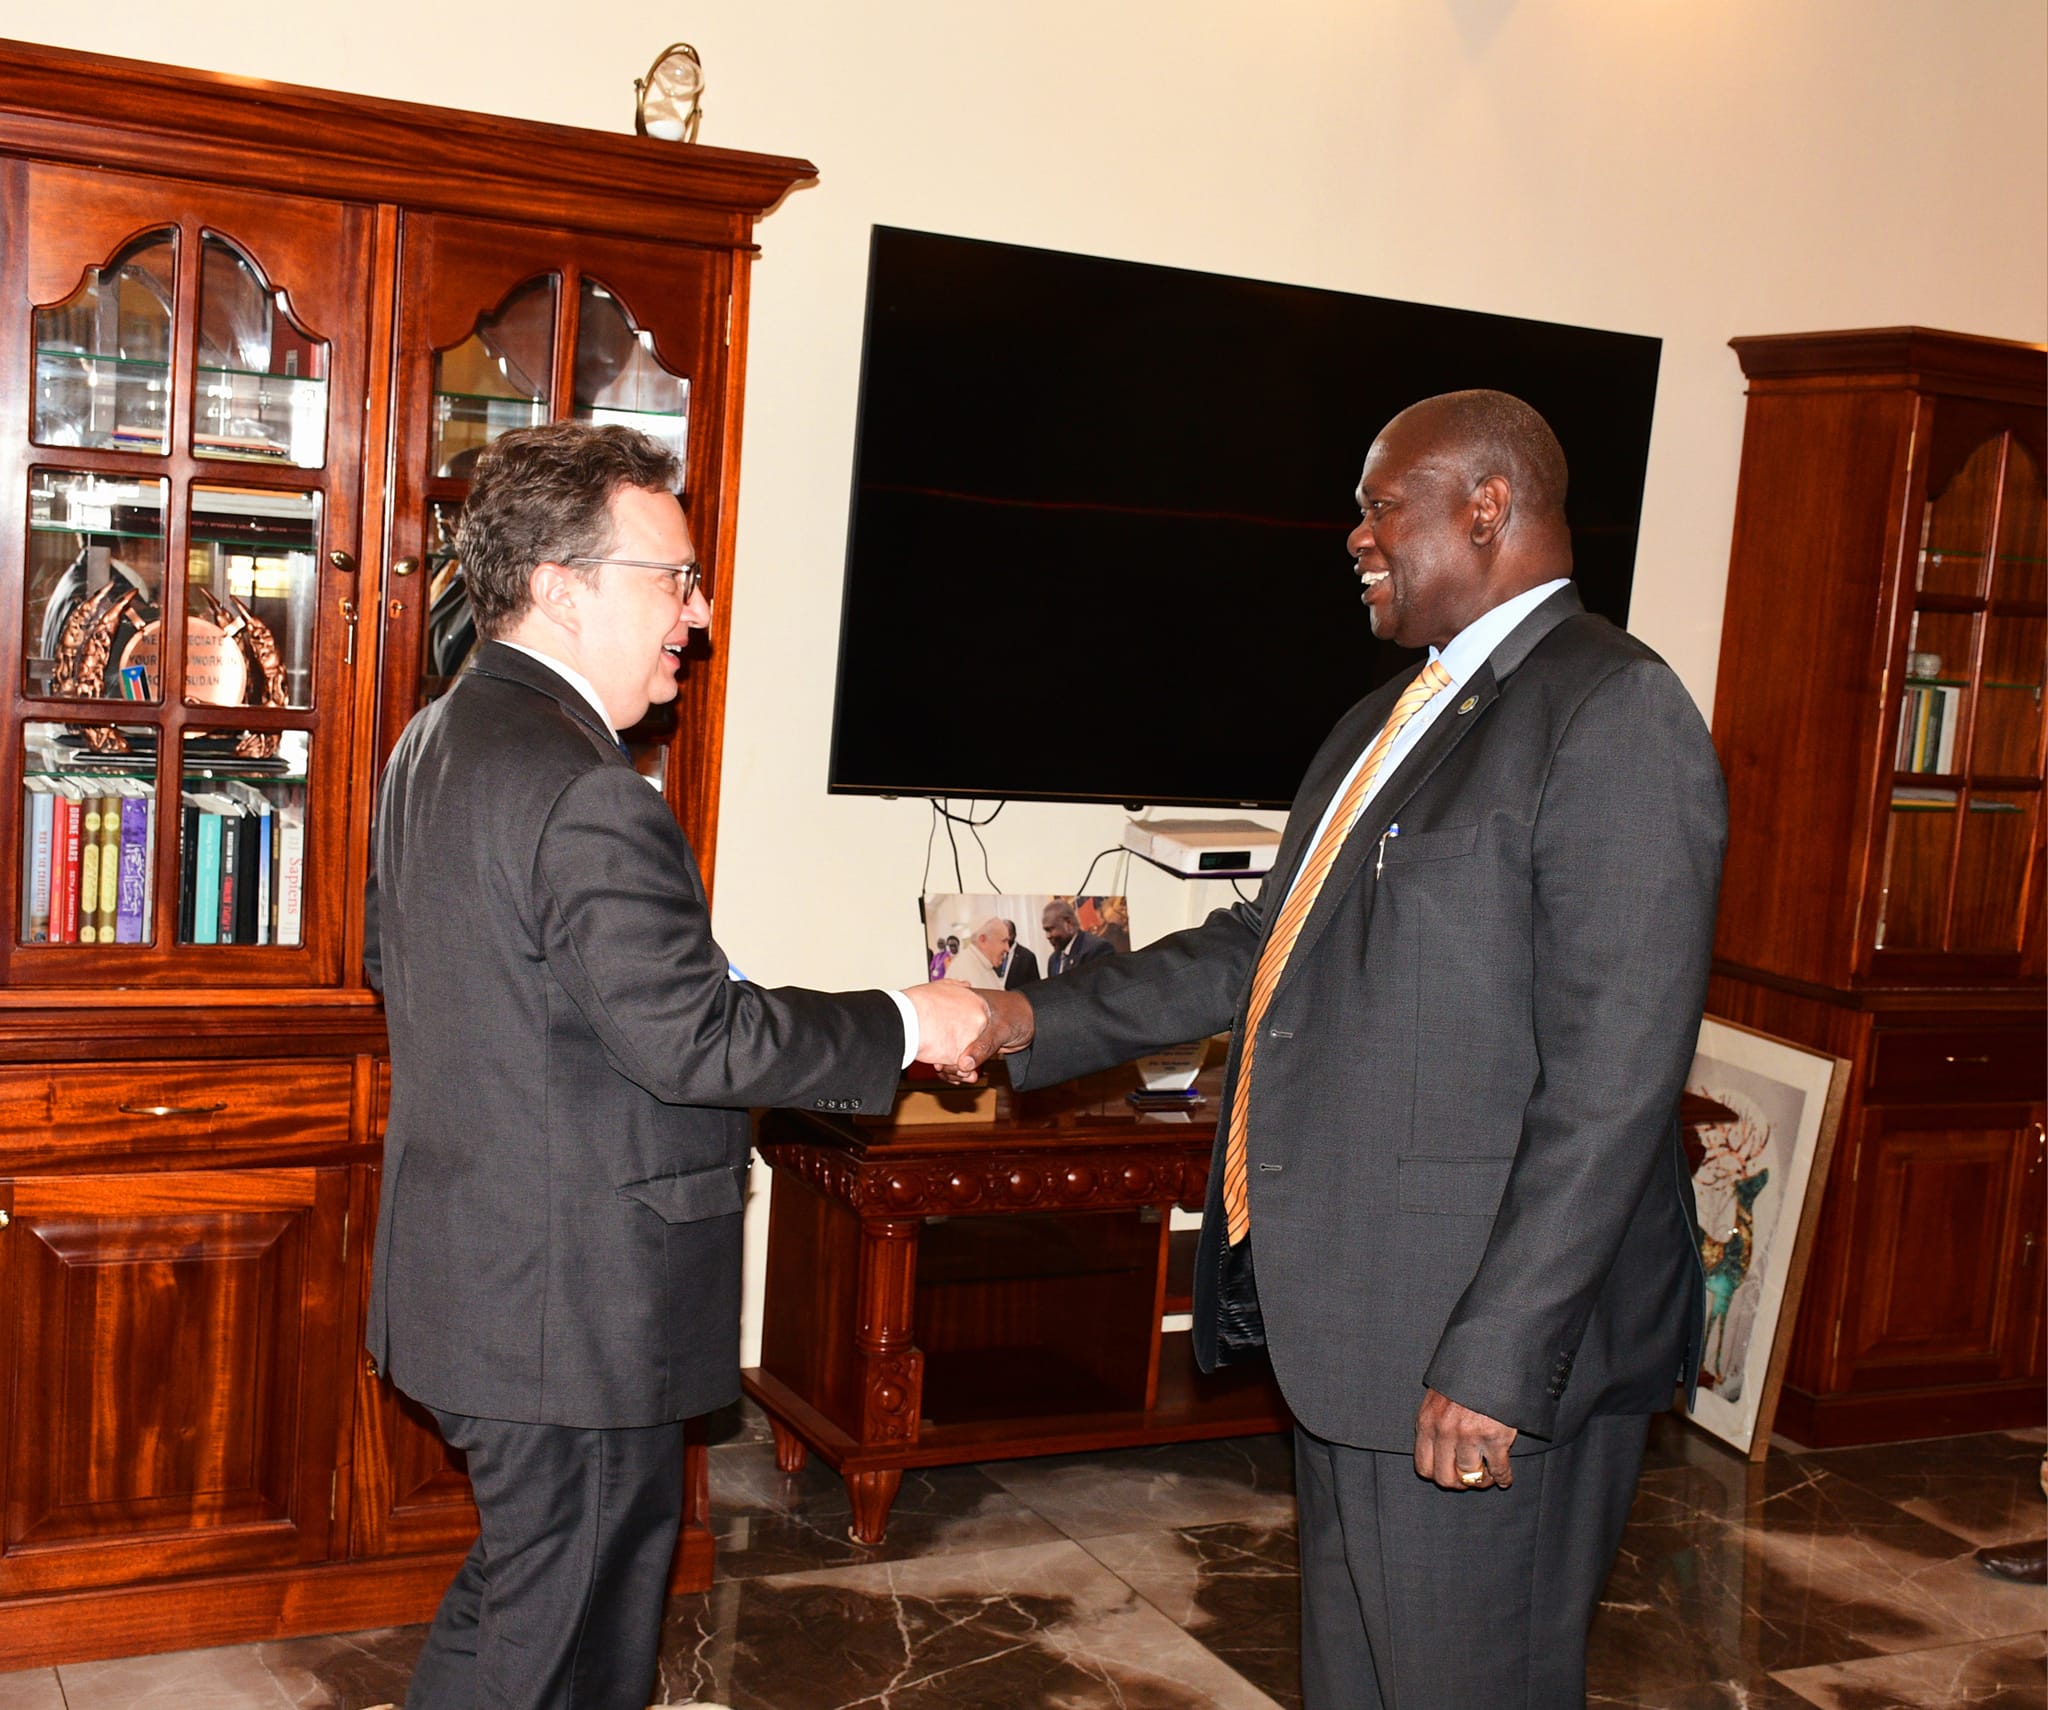 SPLA-IO is Ready for Elections – Machar Confirms